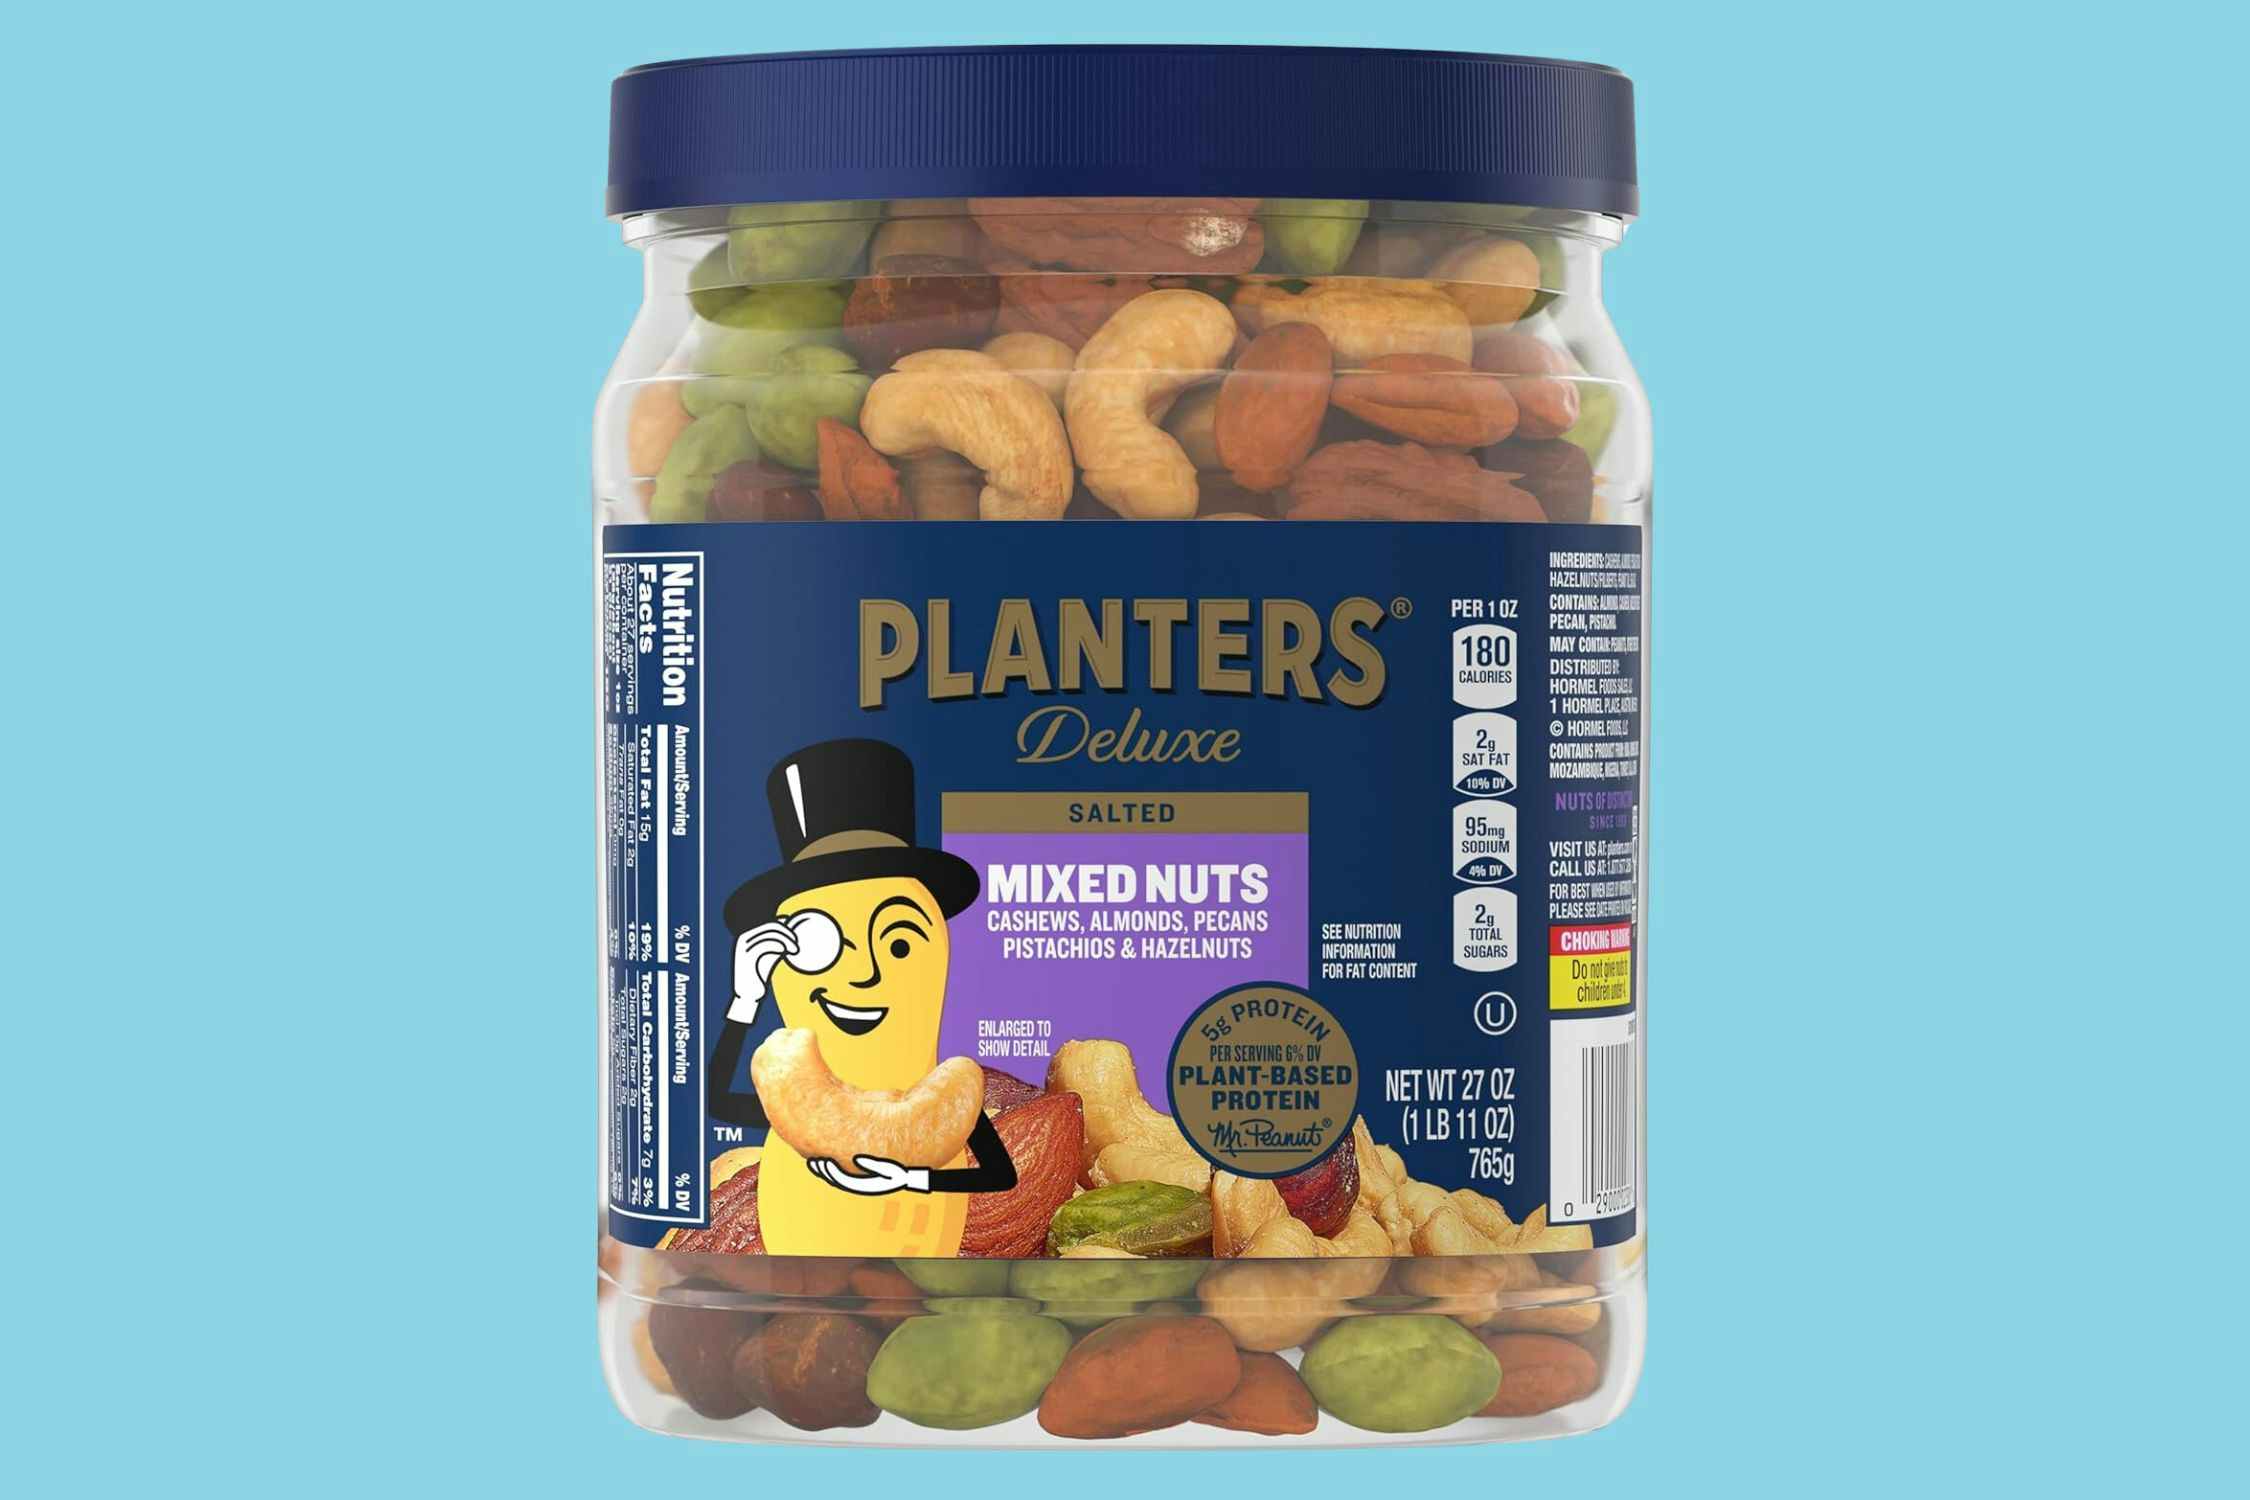 Planters Deluxe Mixed Nuts, as Low as $10.51 on Amazon